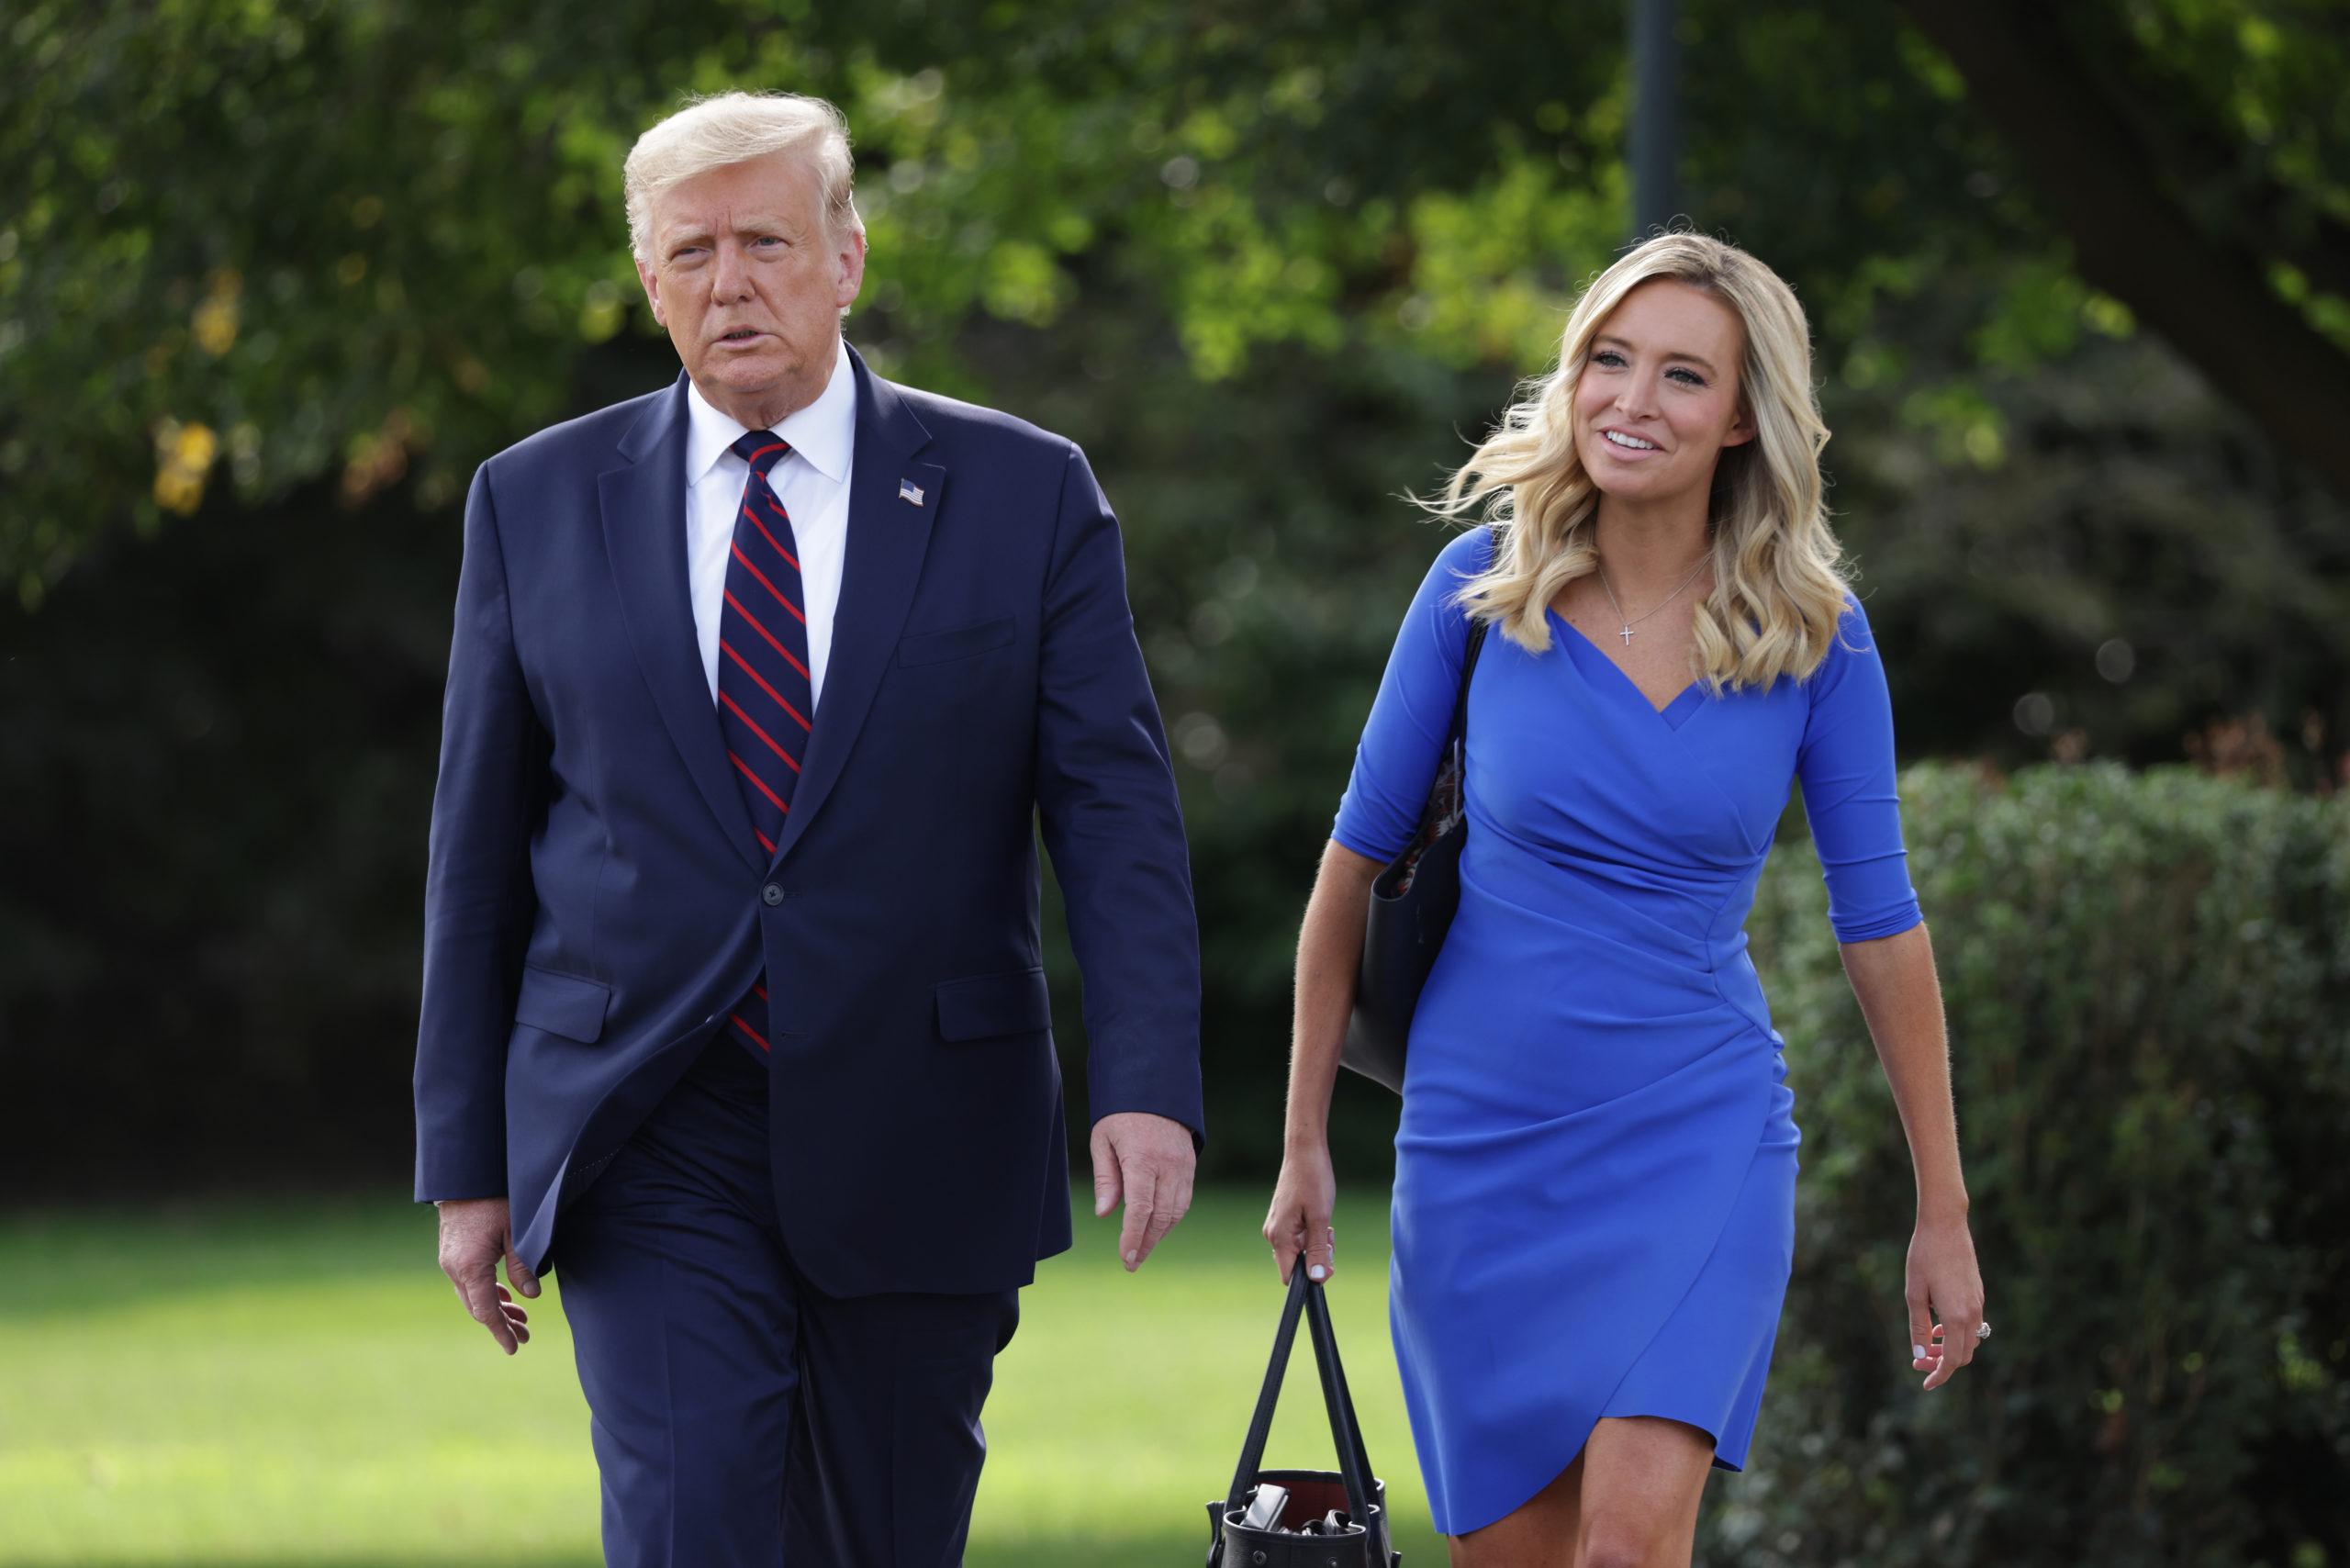 WASHINGTON, DC - SEPTEMBER 15: U.S. President Donald Trump and White House Press Secretary Kayleigh McEnany walk toward members of the press prior to Trump’s departure from the White House on September 15, 2020 in Washington, DC. President Trump was traveling to Philadelphia to participate in an ABC News town hall event. (Photo by Alex Wong/Getty Images)